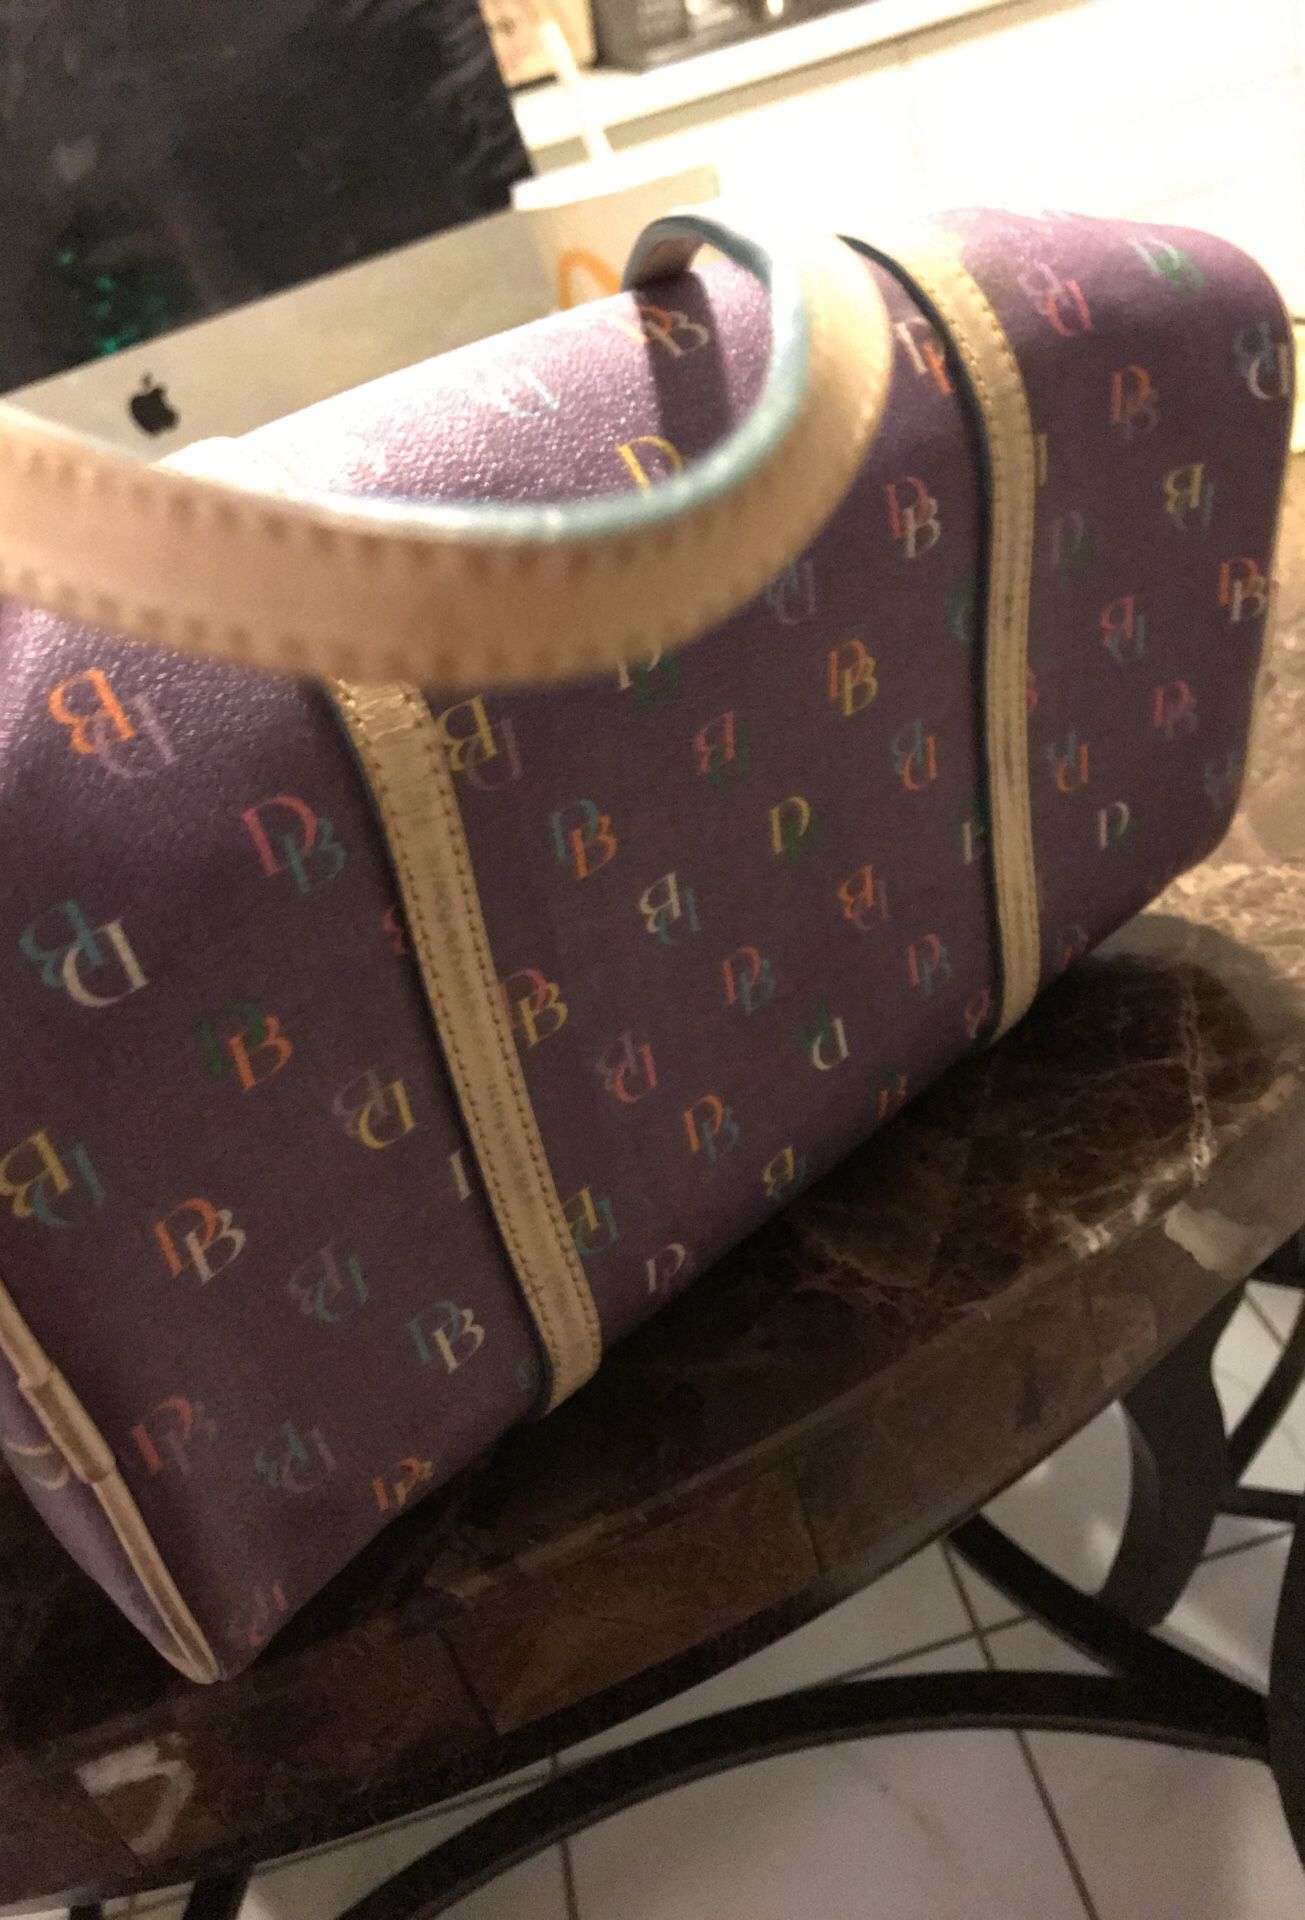 Chicago cubs, Dooney and Bourke purse for Sale in Orland Park, IL - OfferUp